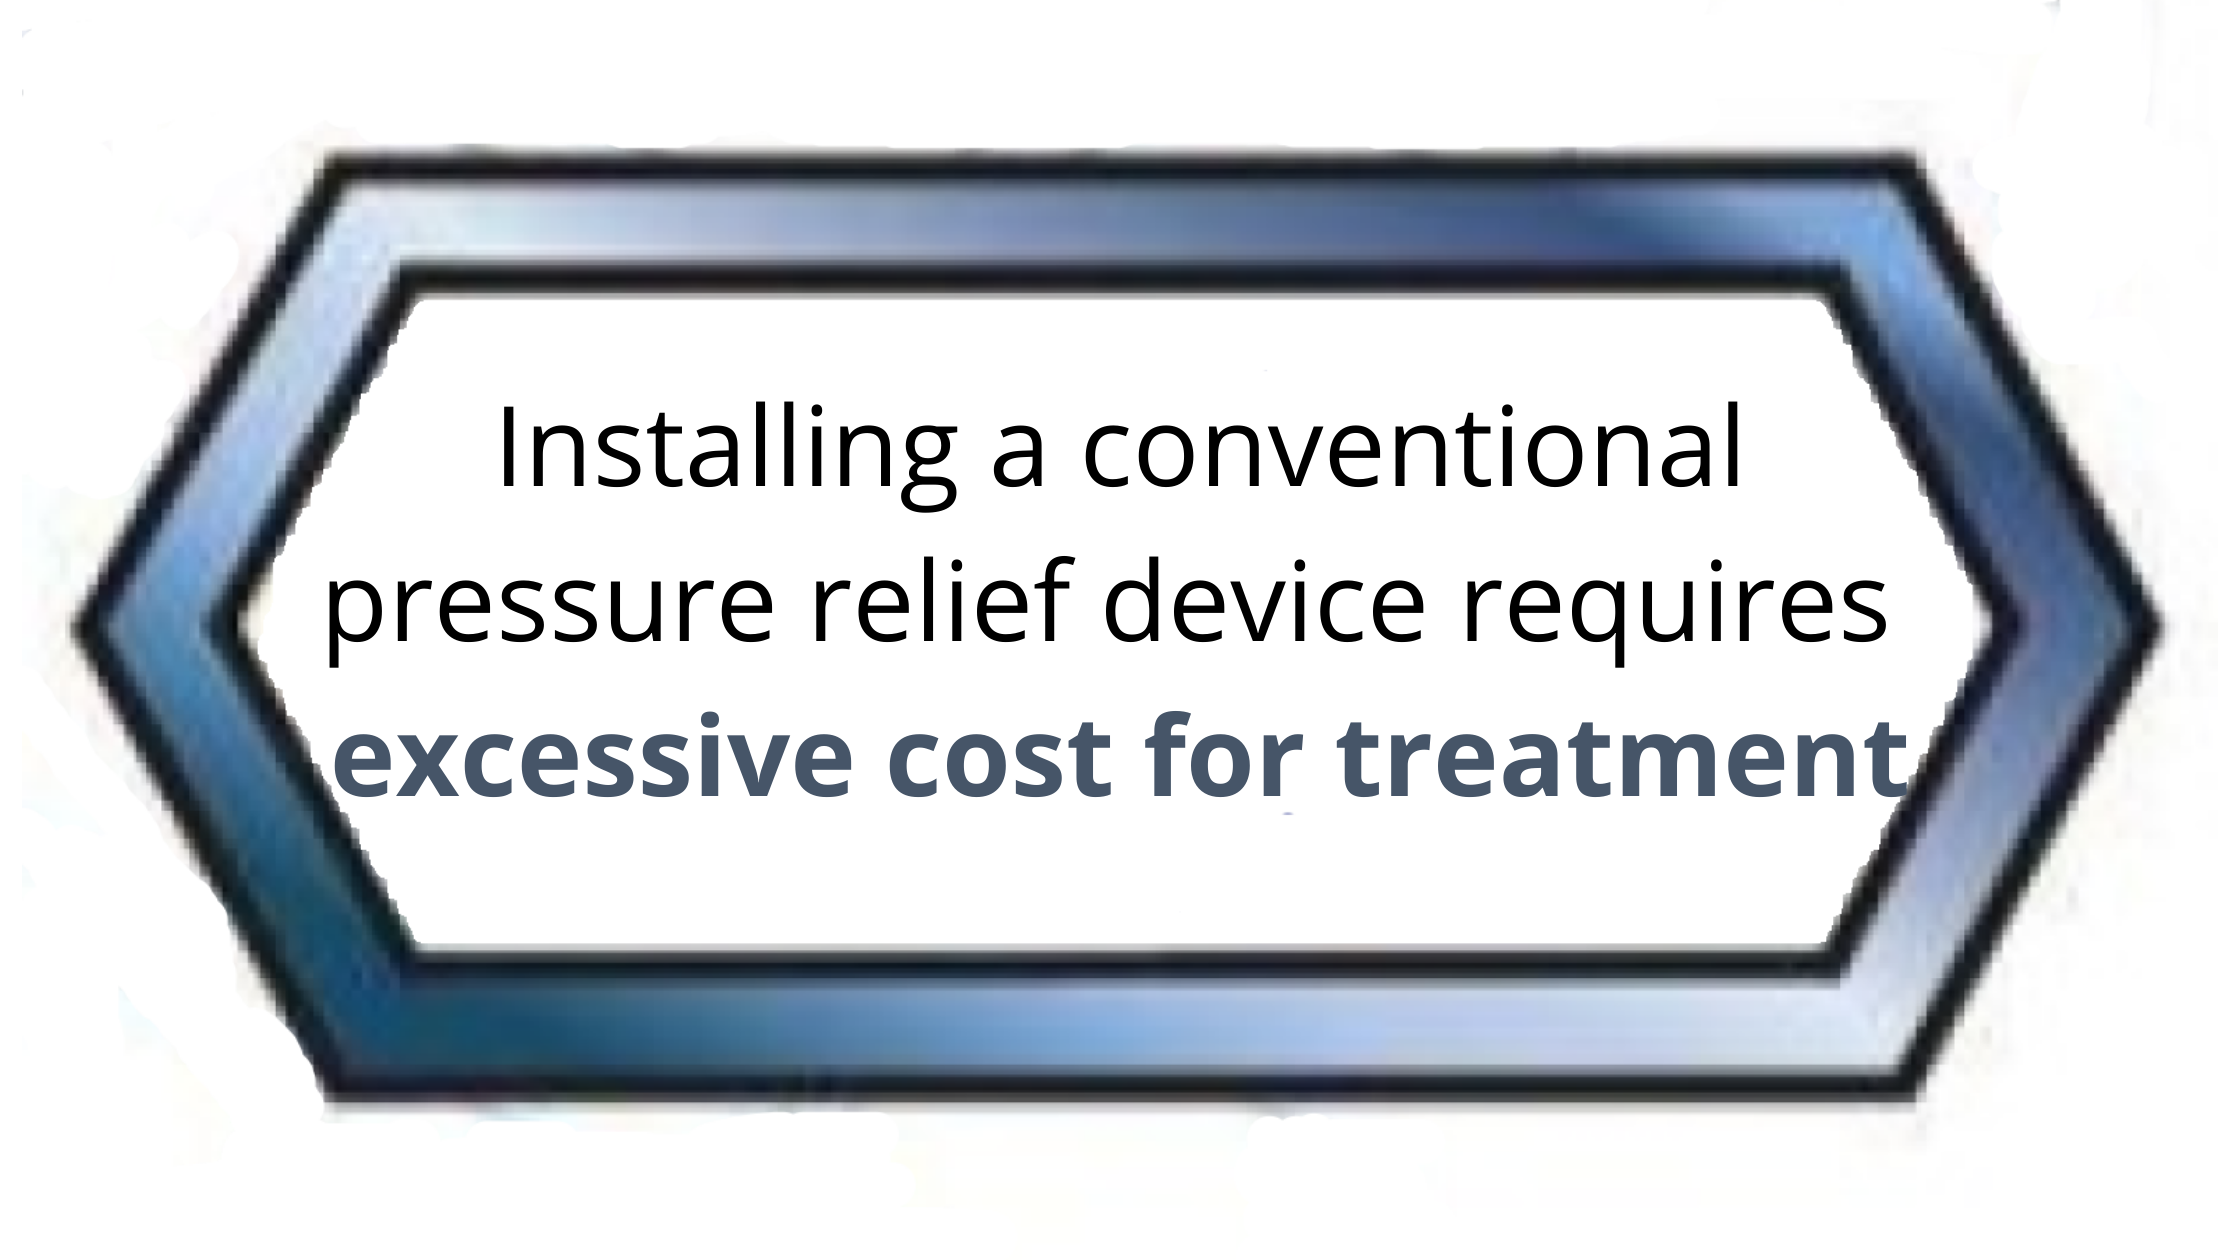 A conventional pressure relief device is “not possible or practical” (2)